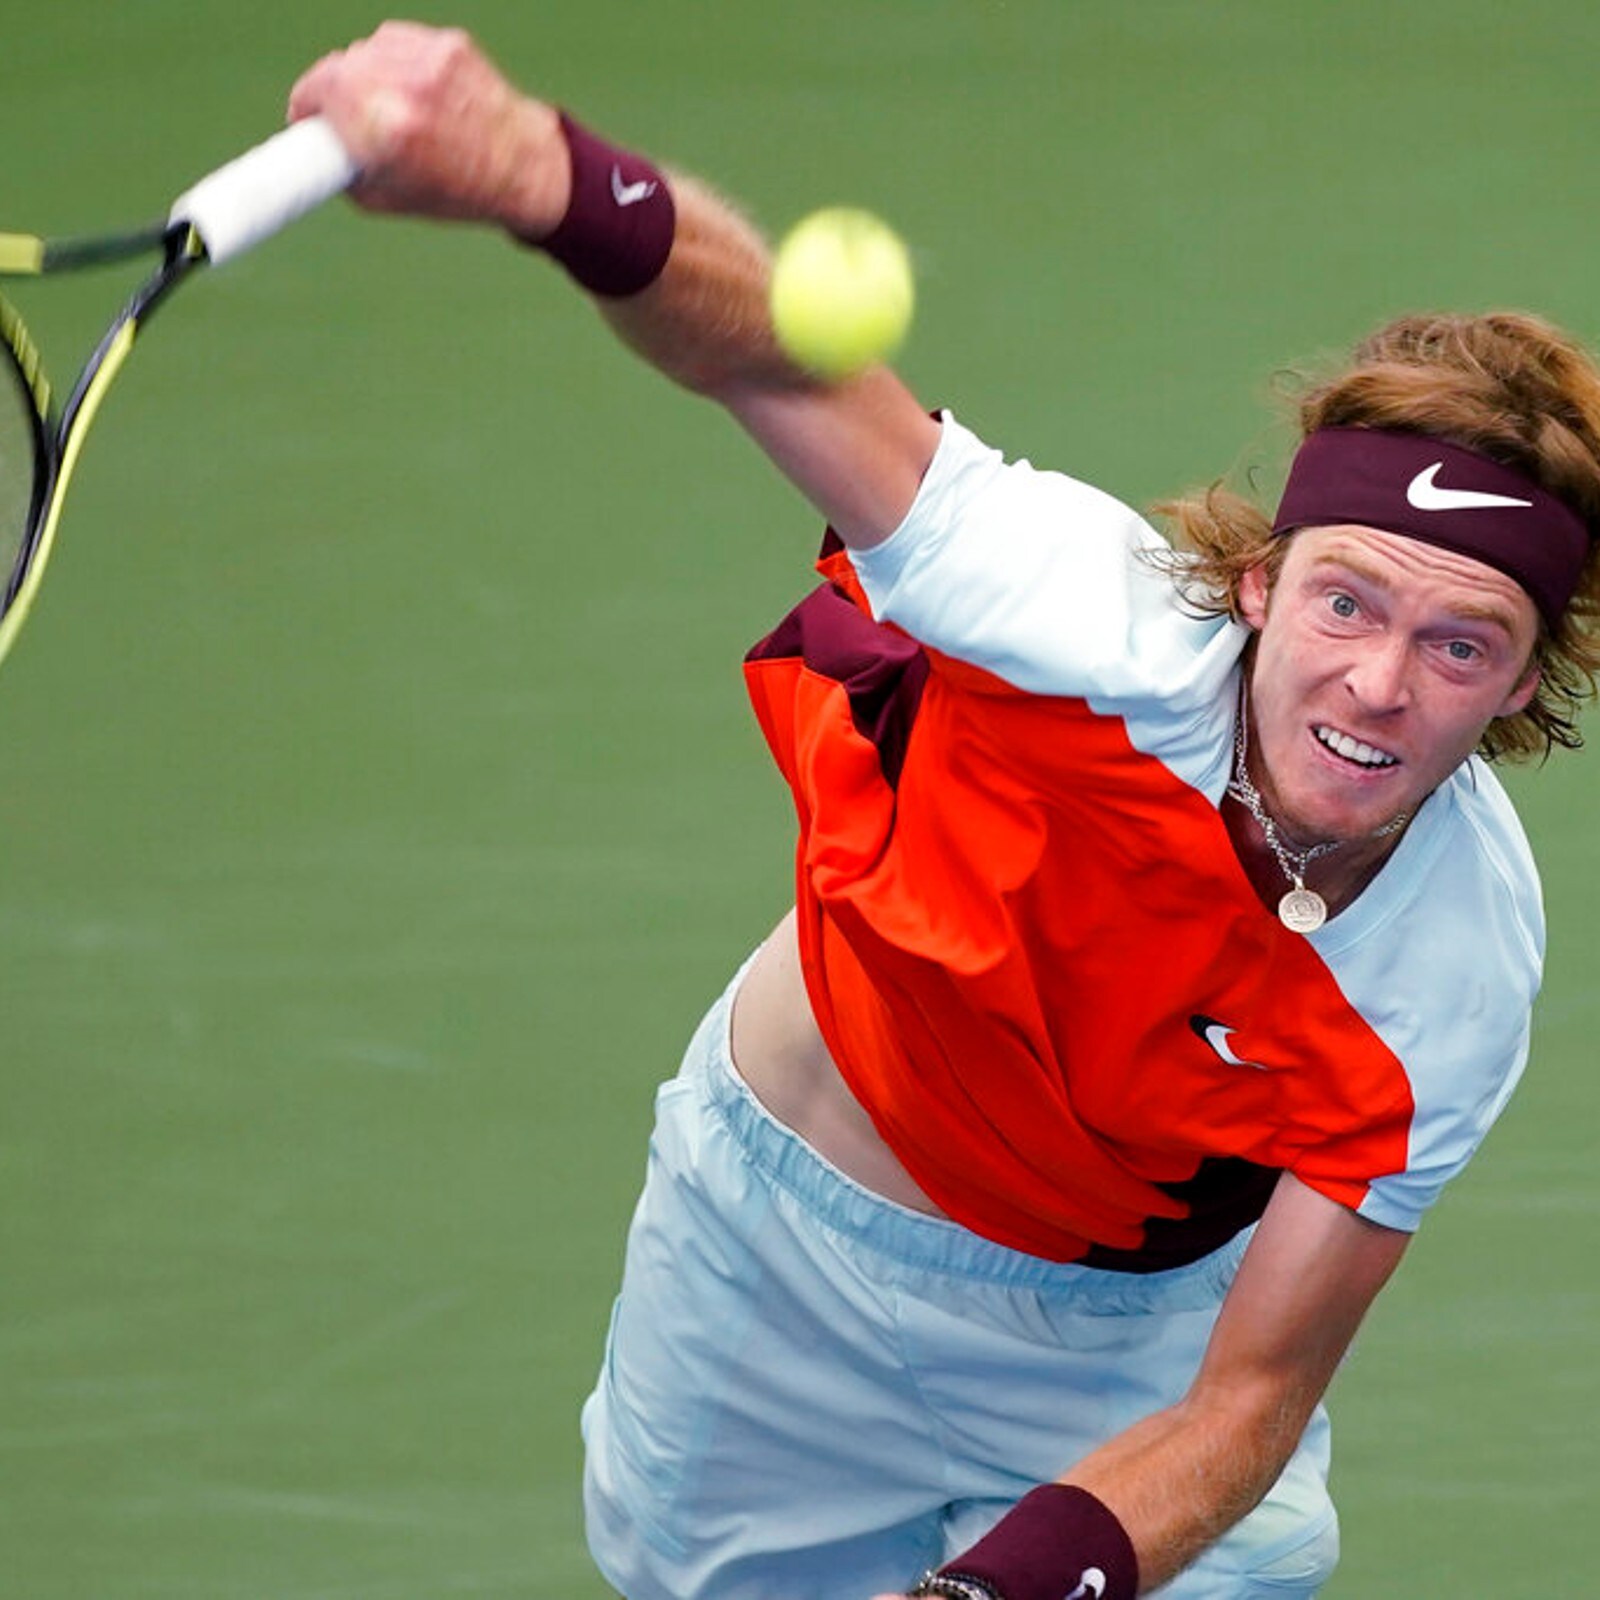 US Open 2022 Andrey Rublev Tops Cameron Norrie to Enter Quarters